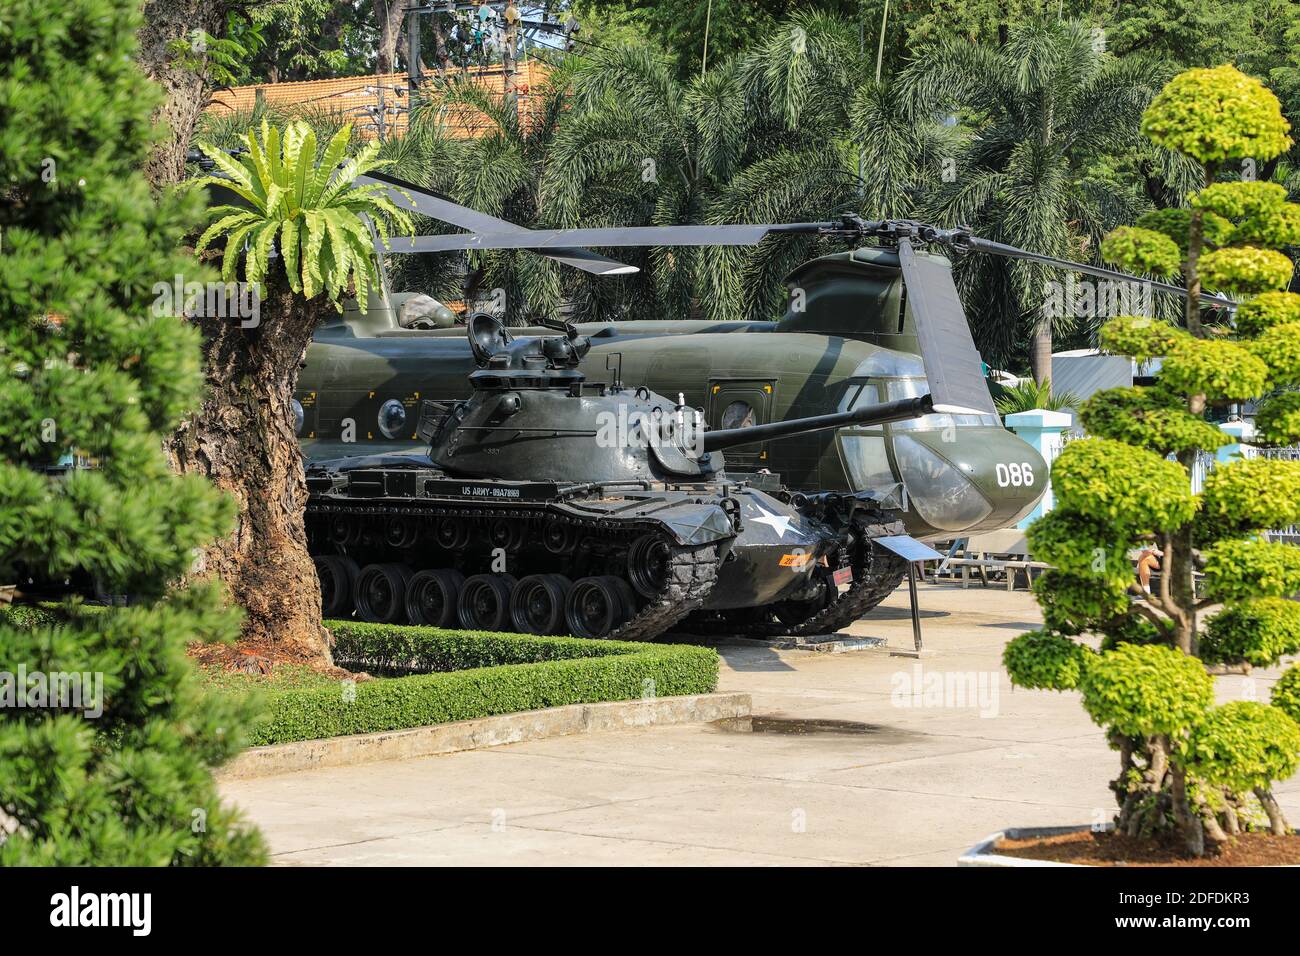 An American or US tank and helicopter outside the War Remnants Museum, a war museum, Ho Chi Minh City, Vietnam, Asia Stock Photo